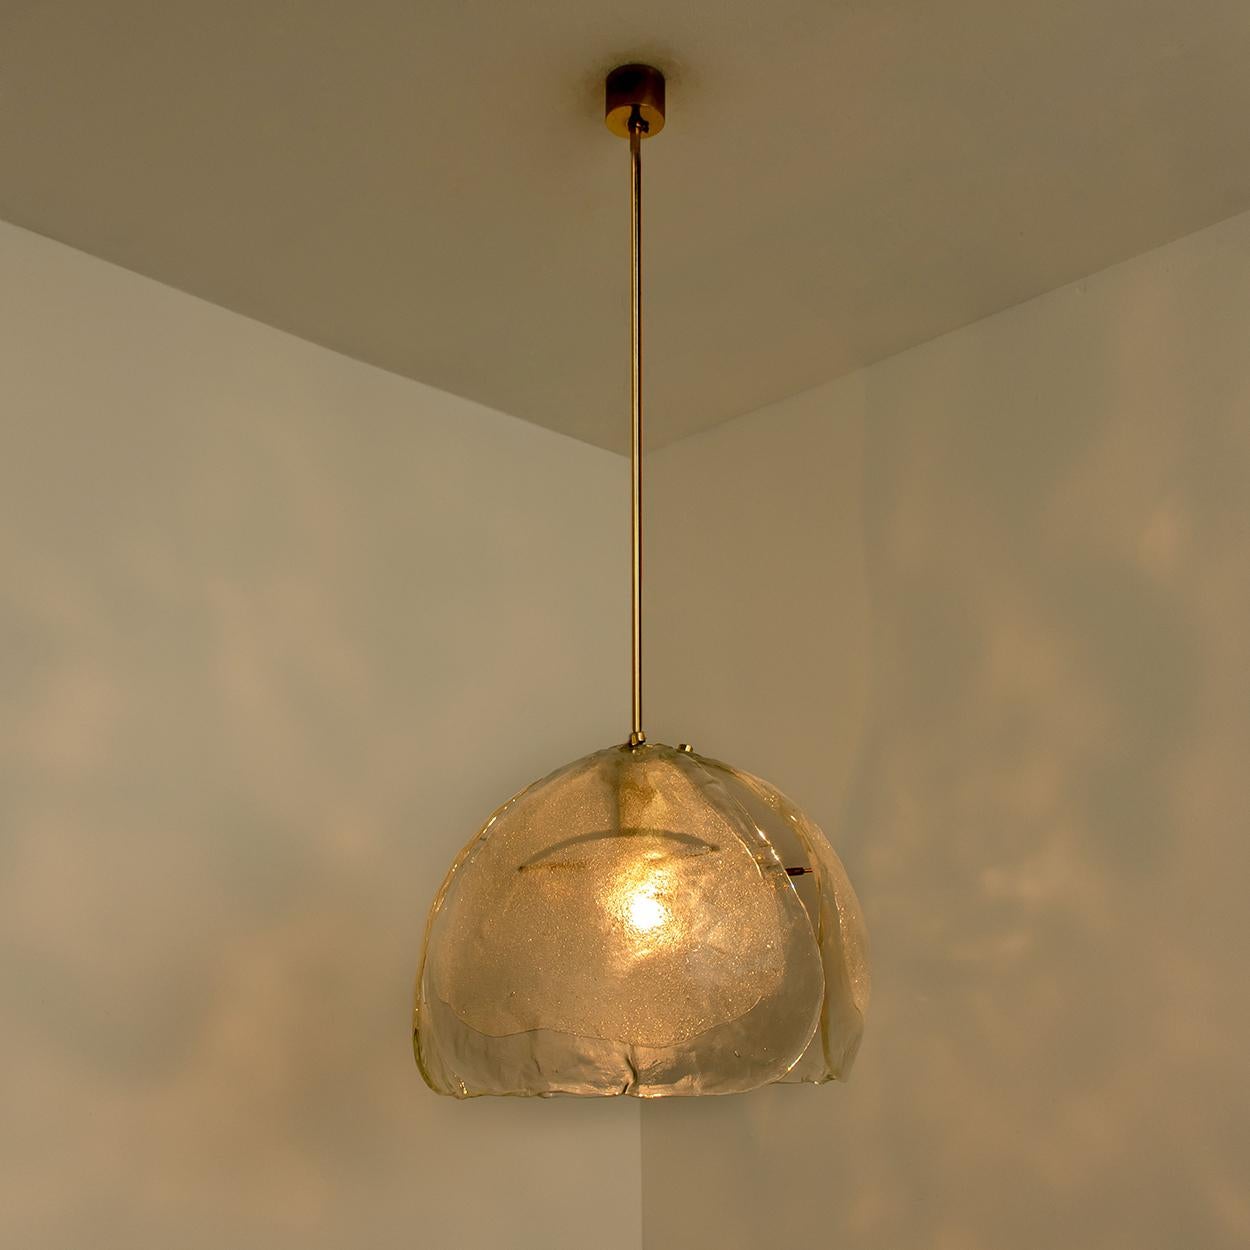 1 of the 2 Kalmar Style Pendant Lights, Clear Glass and Brass, 1970s For Sale 2